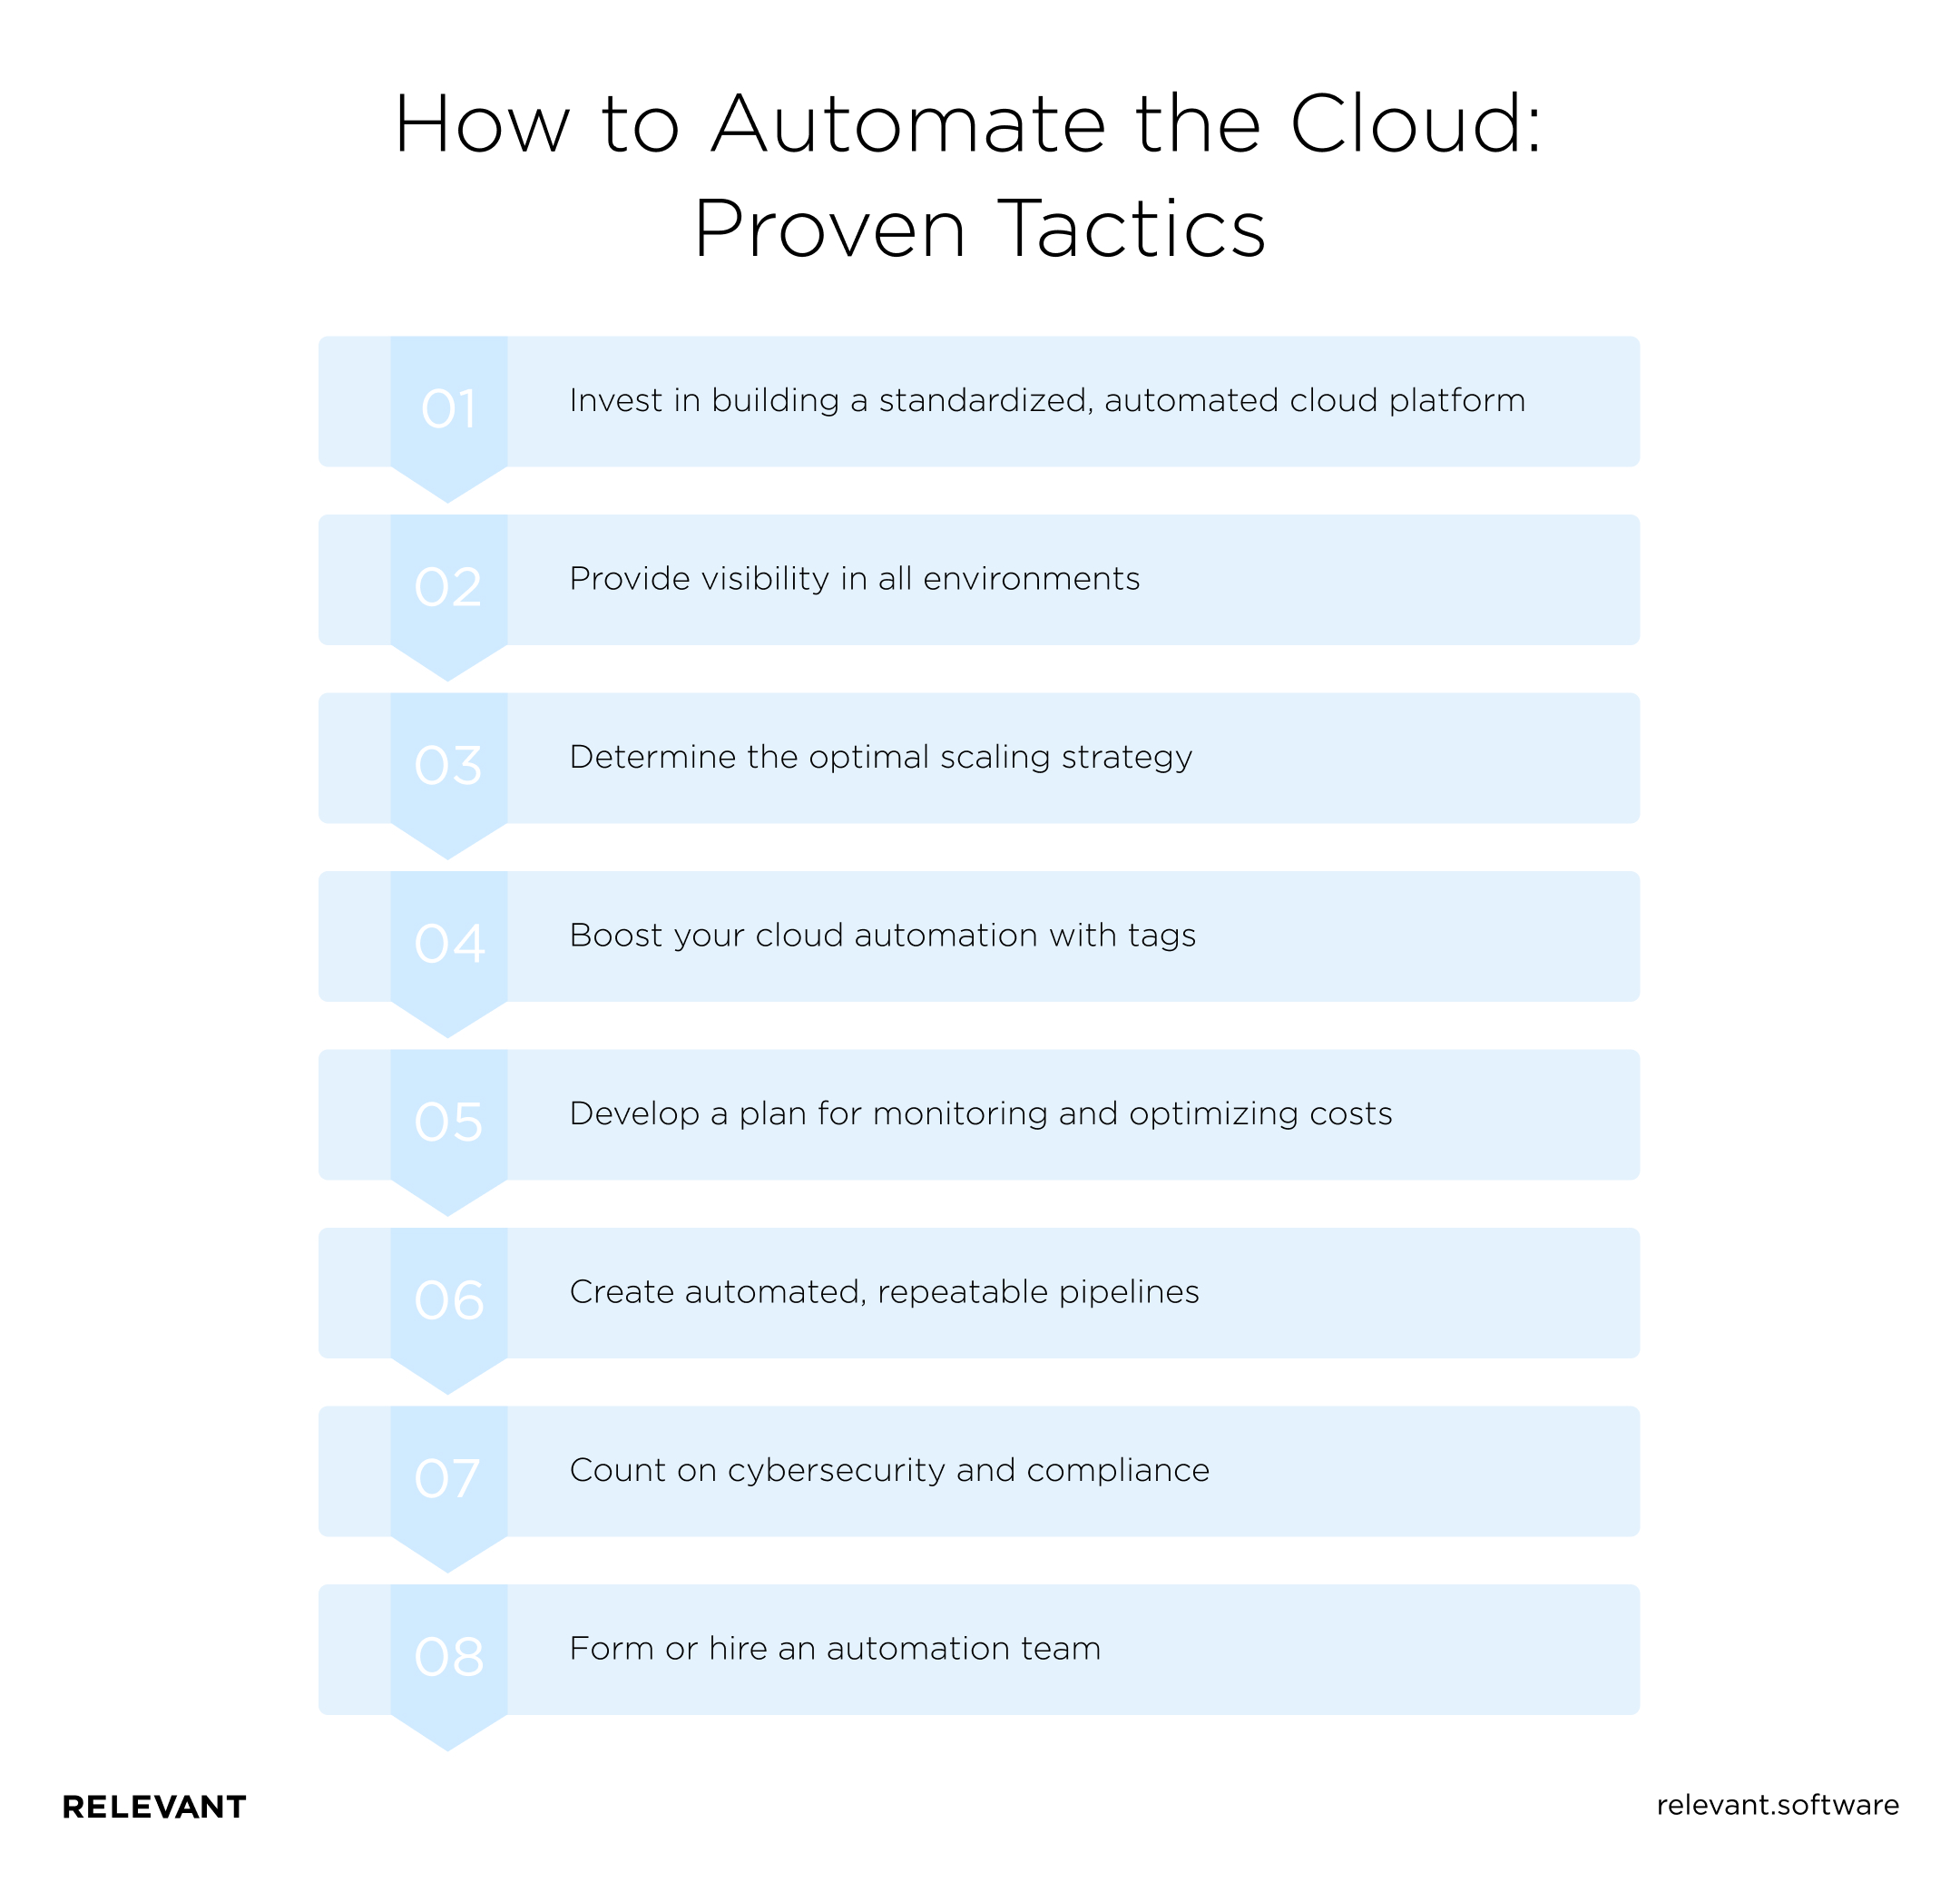 How to Automate the Cloud: Proven Tactics